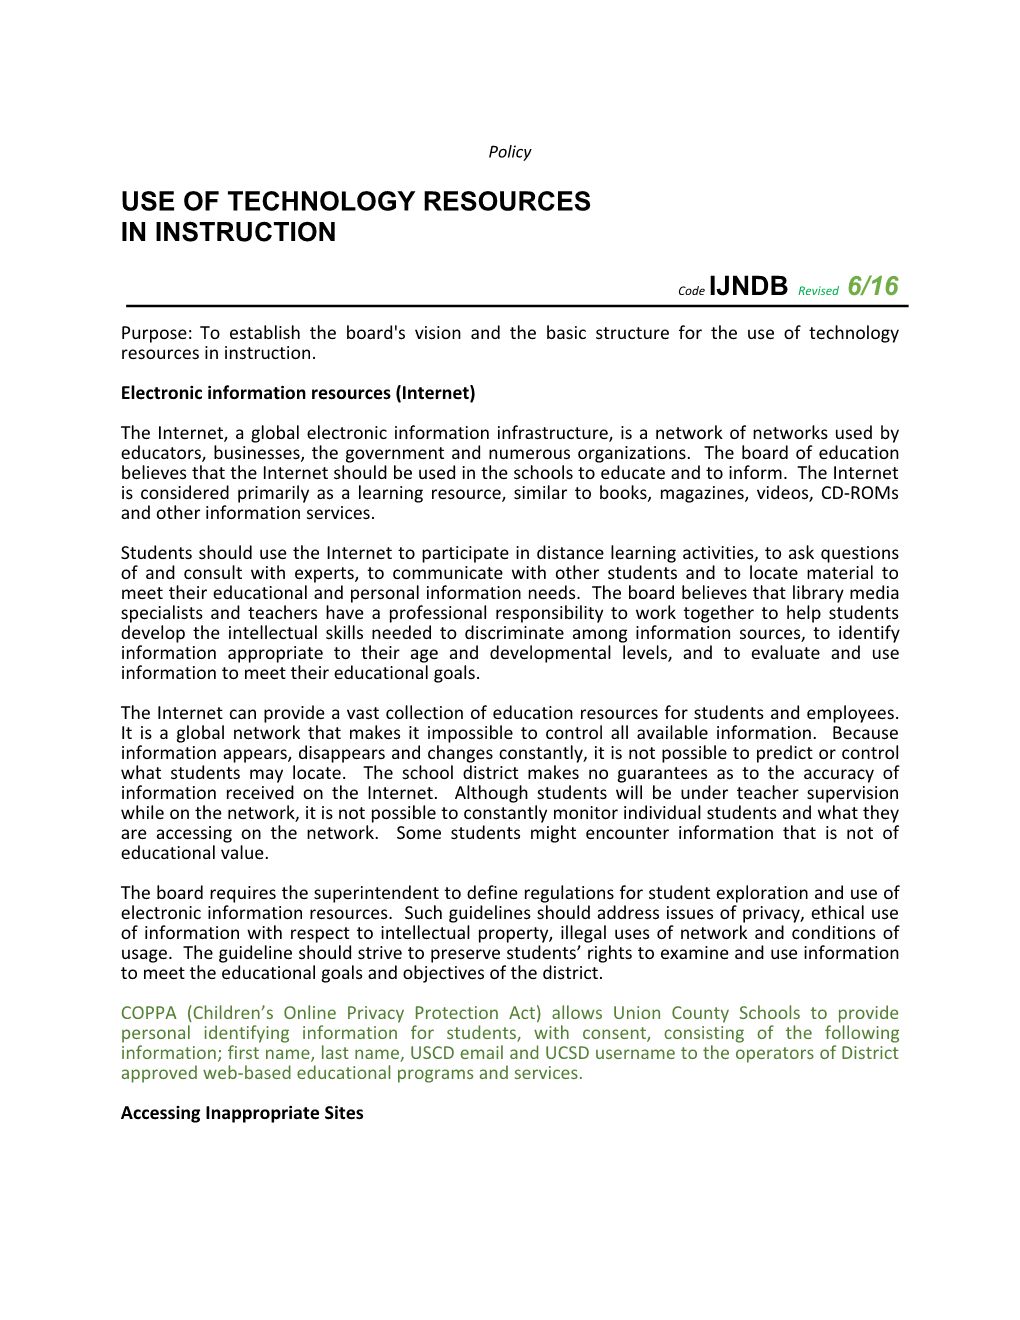 Page 1 - Ijndb-R - Use of Technology Resources in Instruction